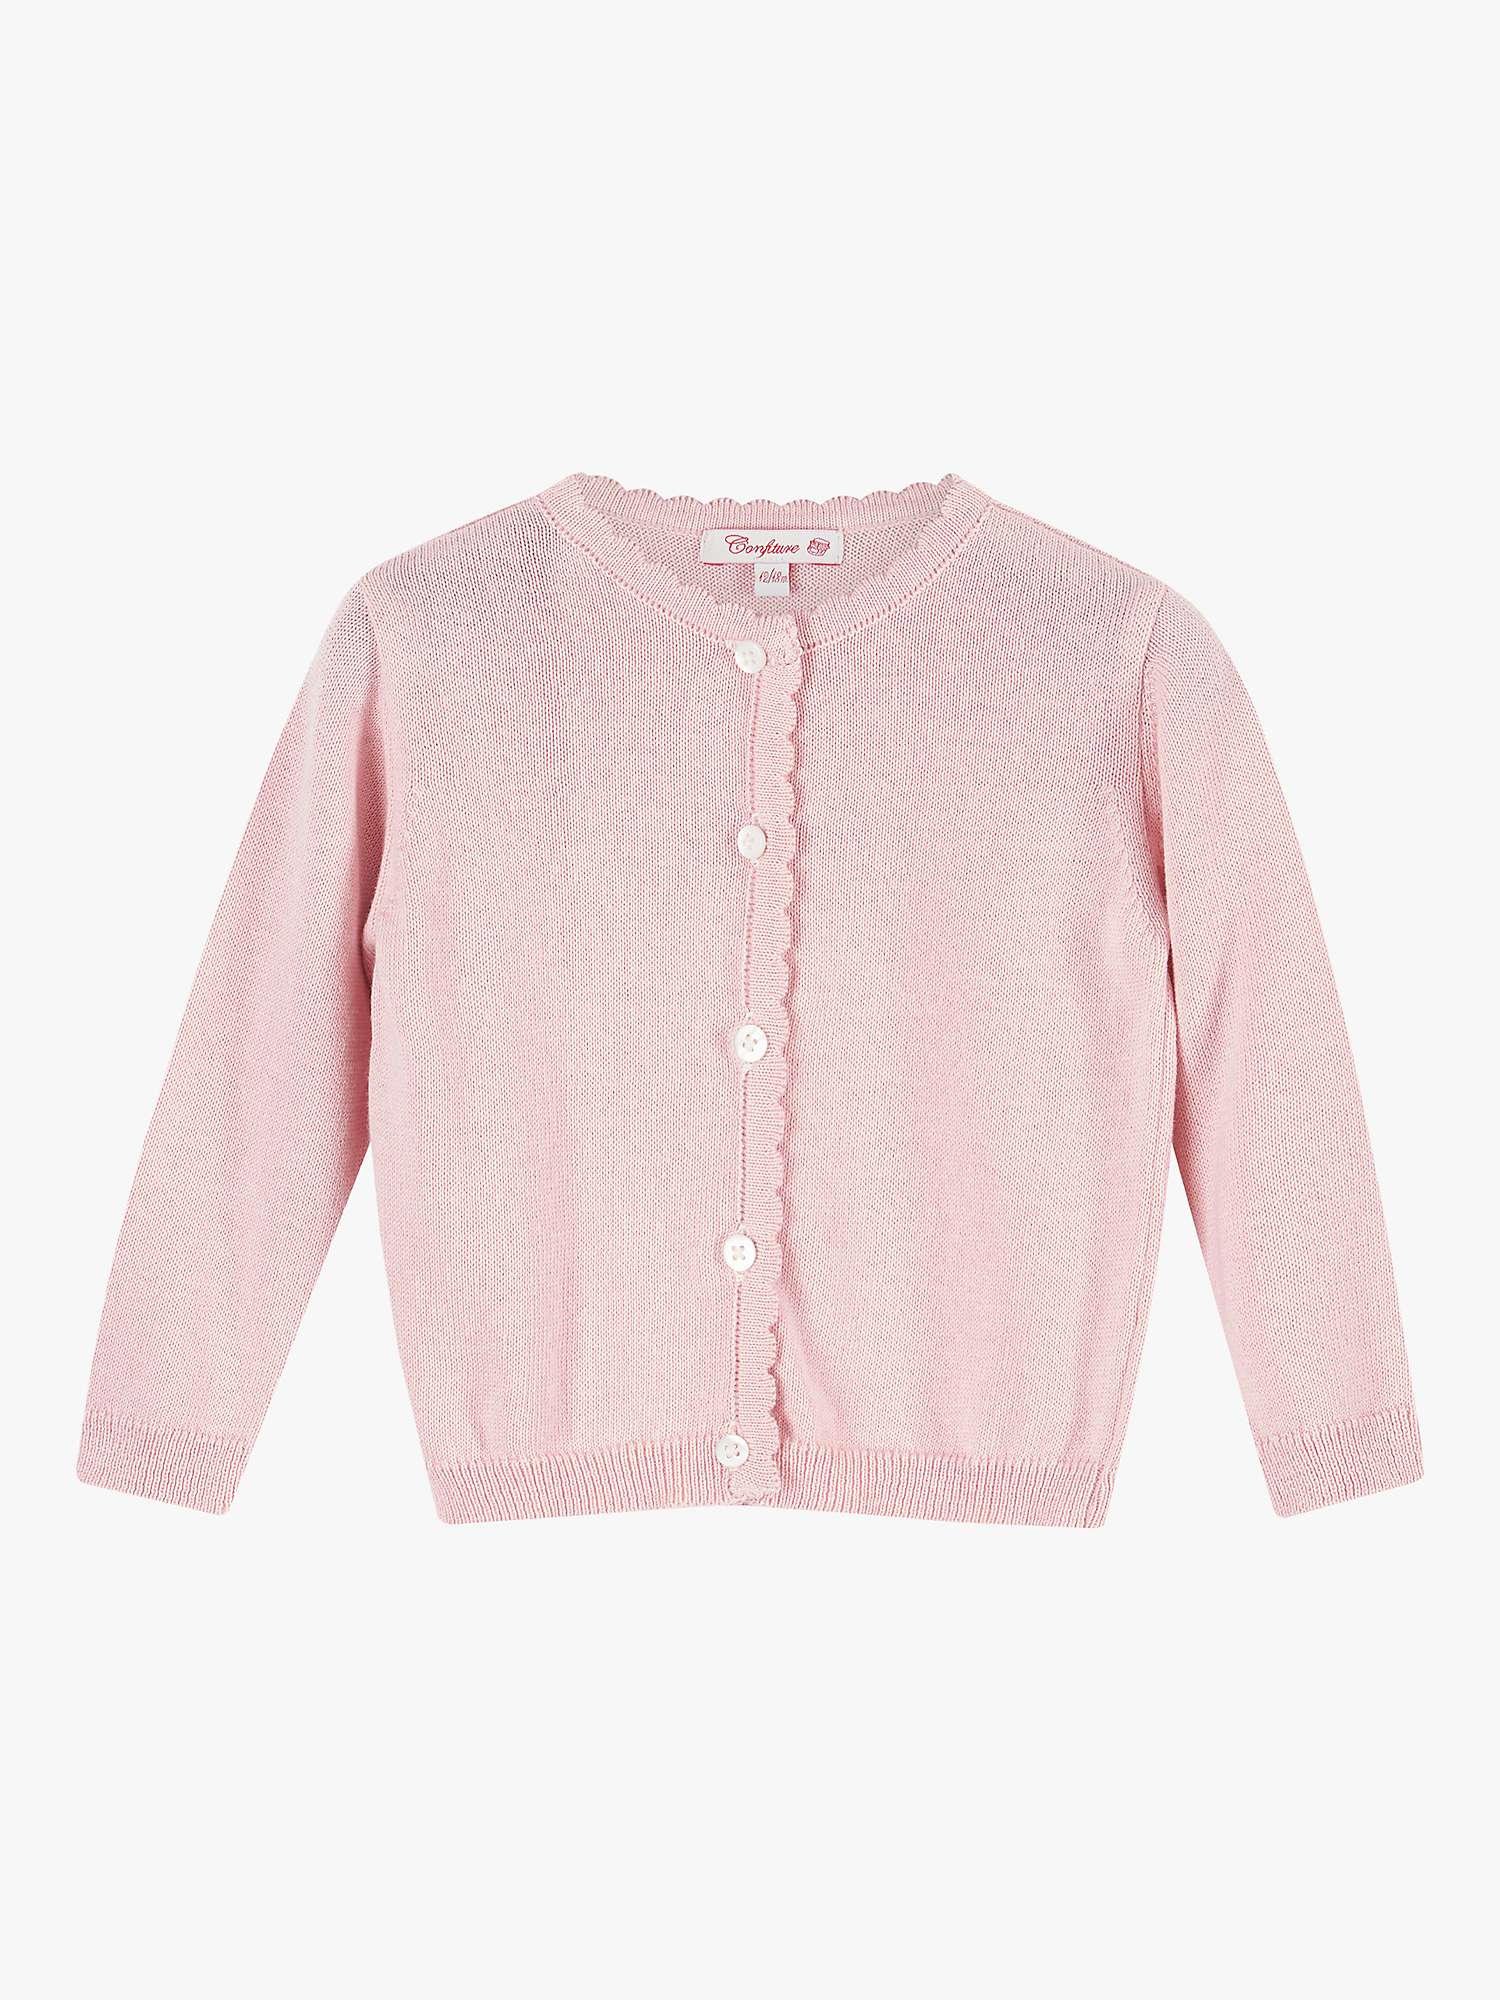 Buy Trotters Baby Scalloped Edge Cardigan Online at johnlewis.com